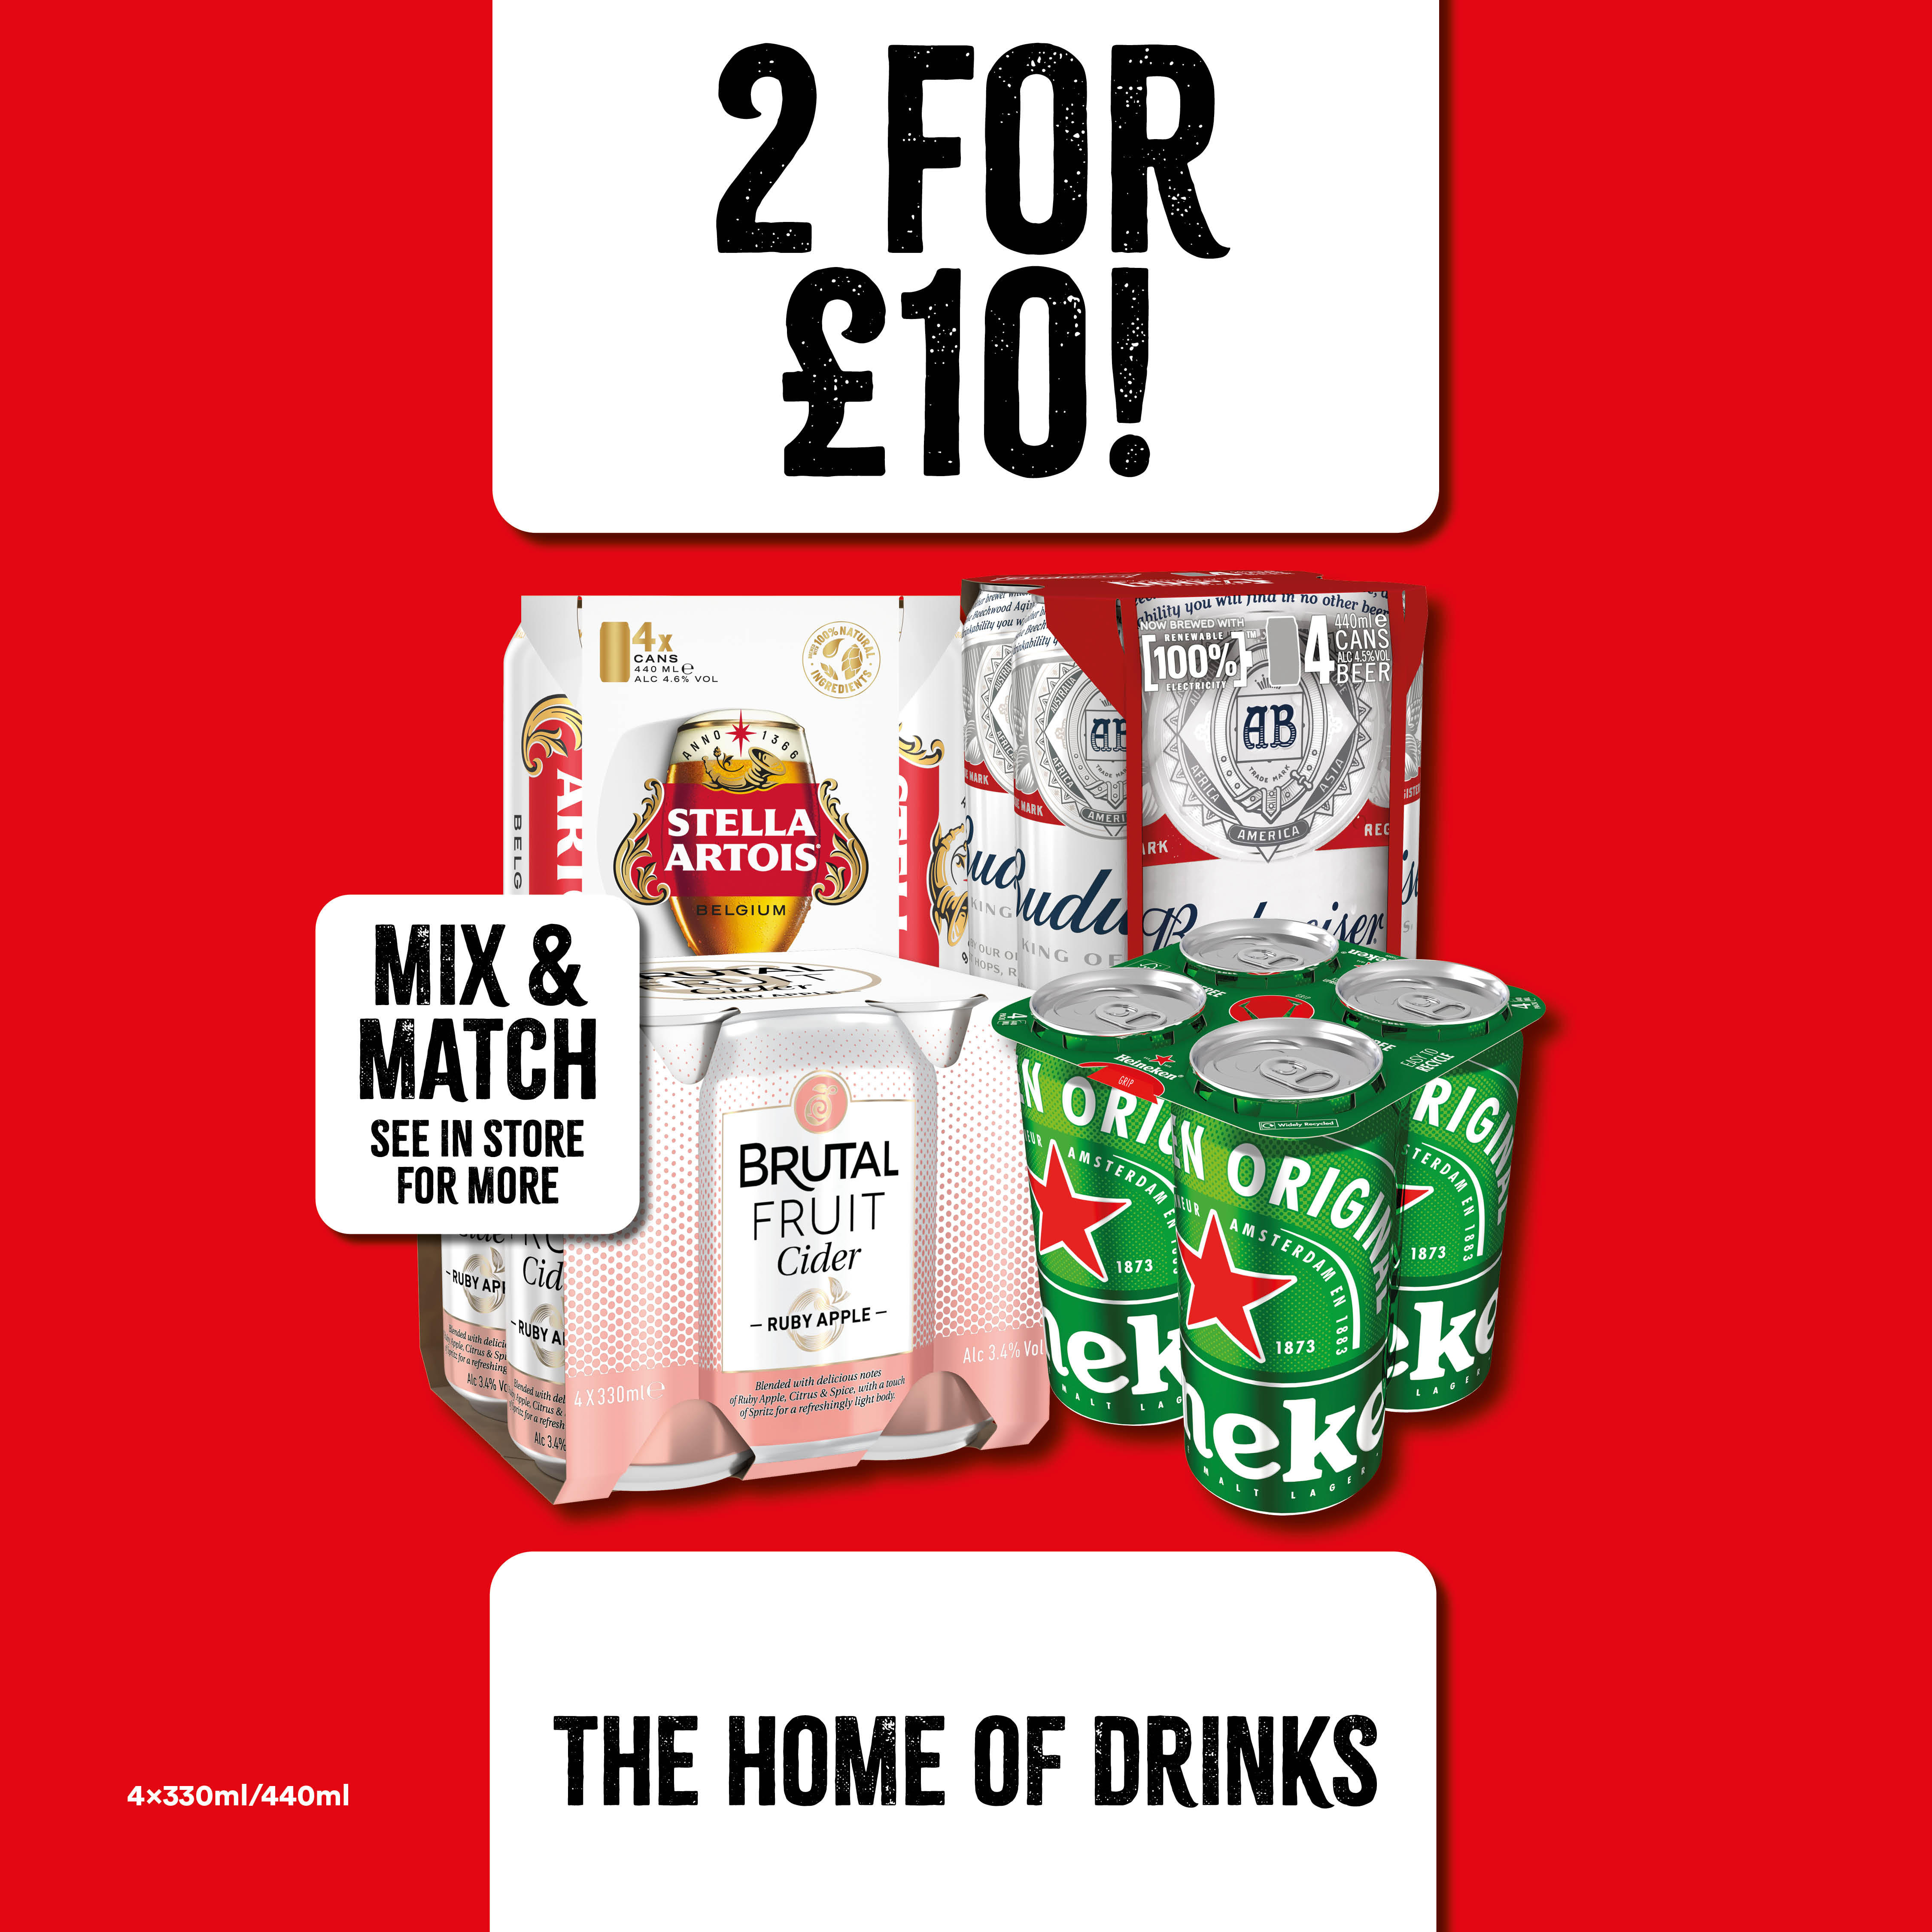 2 for £10 on 4 pack beers and cider Bargain Booze Holmes Chapel 01477 537193